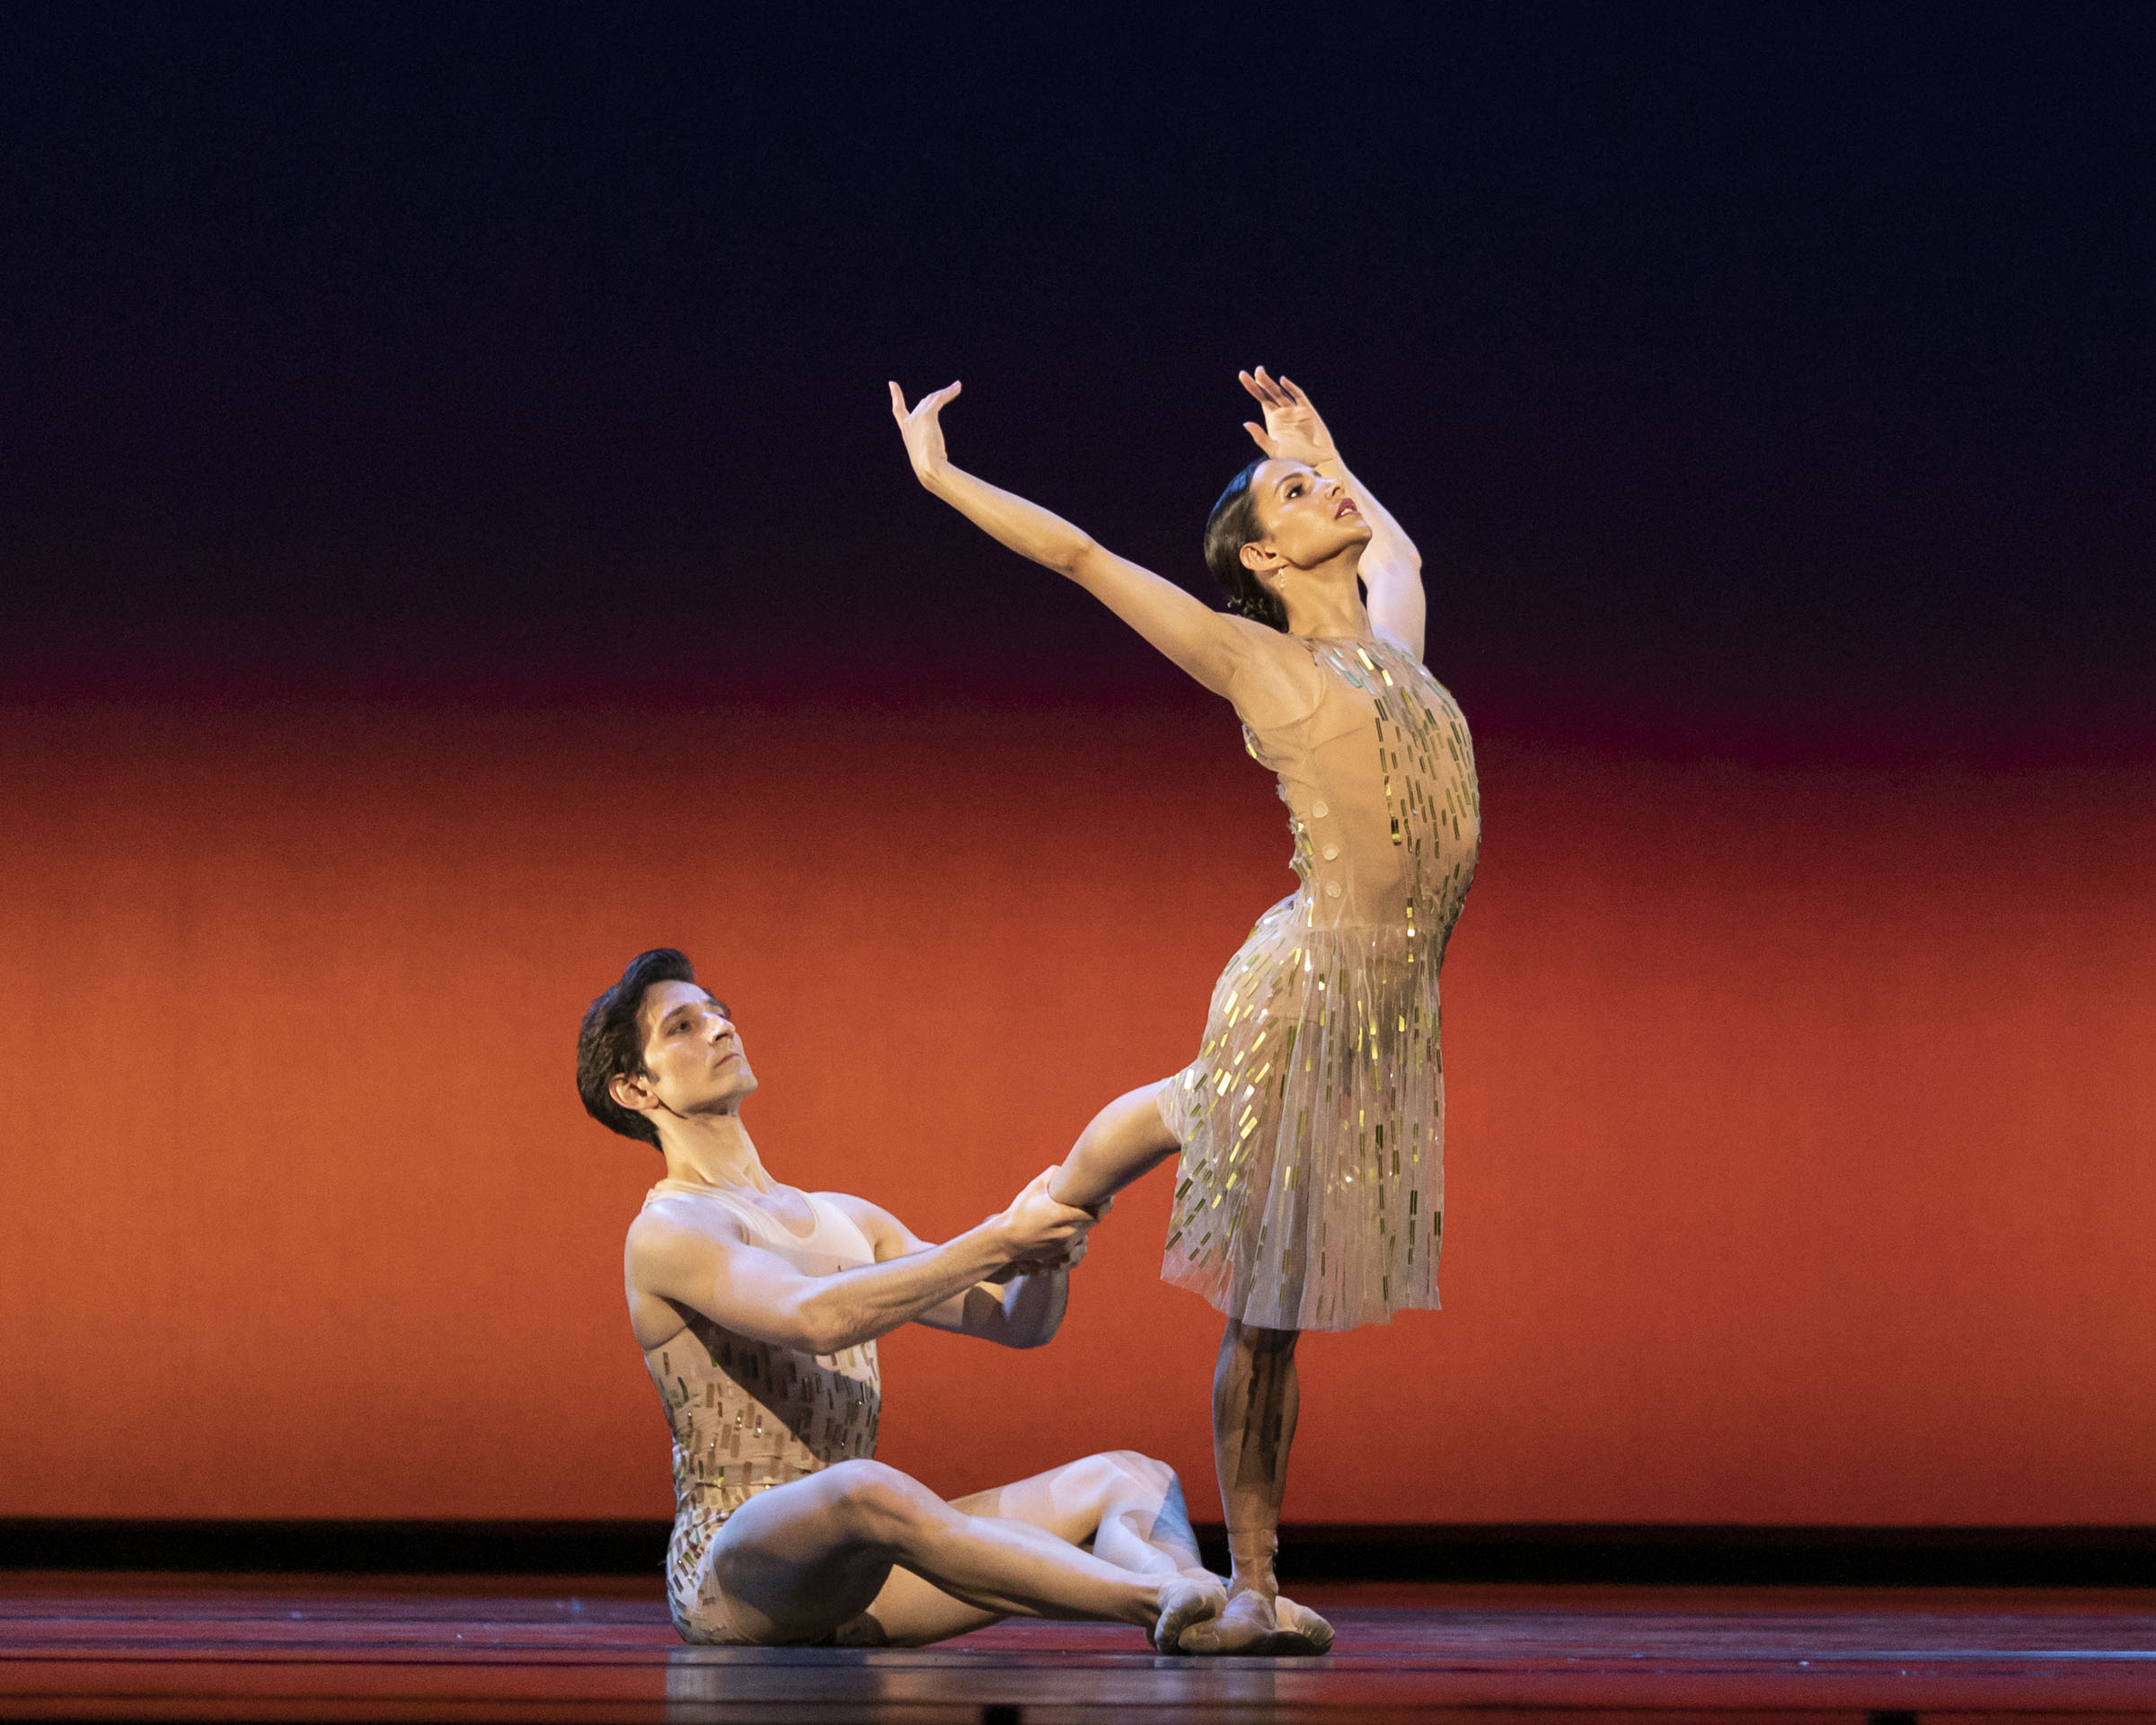 Valentino Zucchetti and Francesca Hayward in 'Within the Golden Hour' at The Royal Opera House